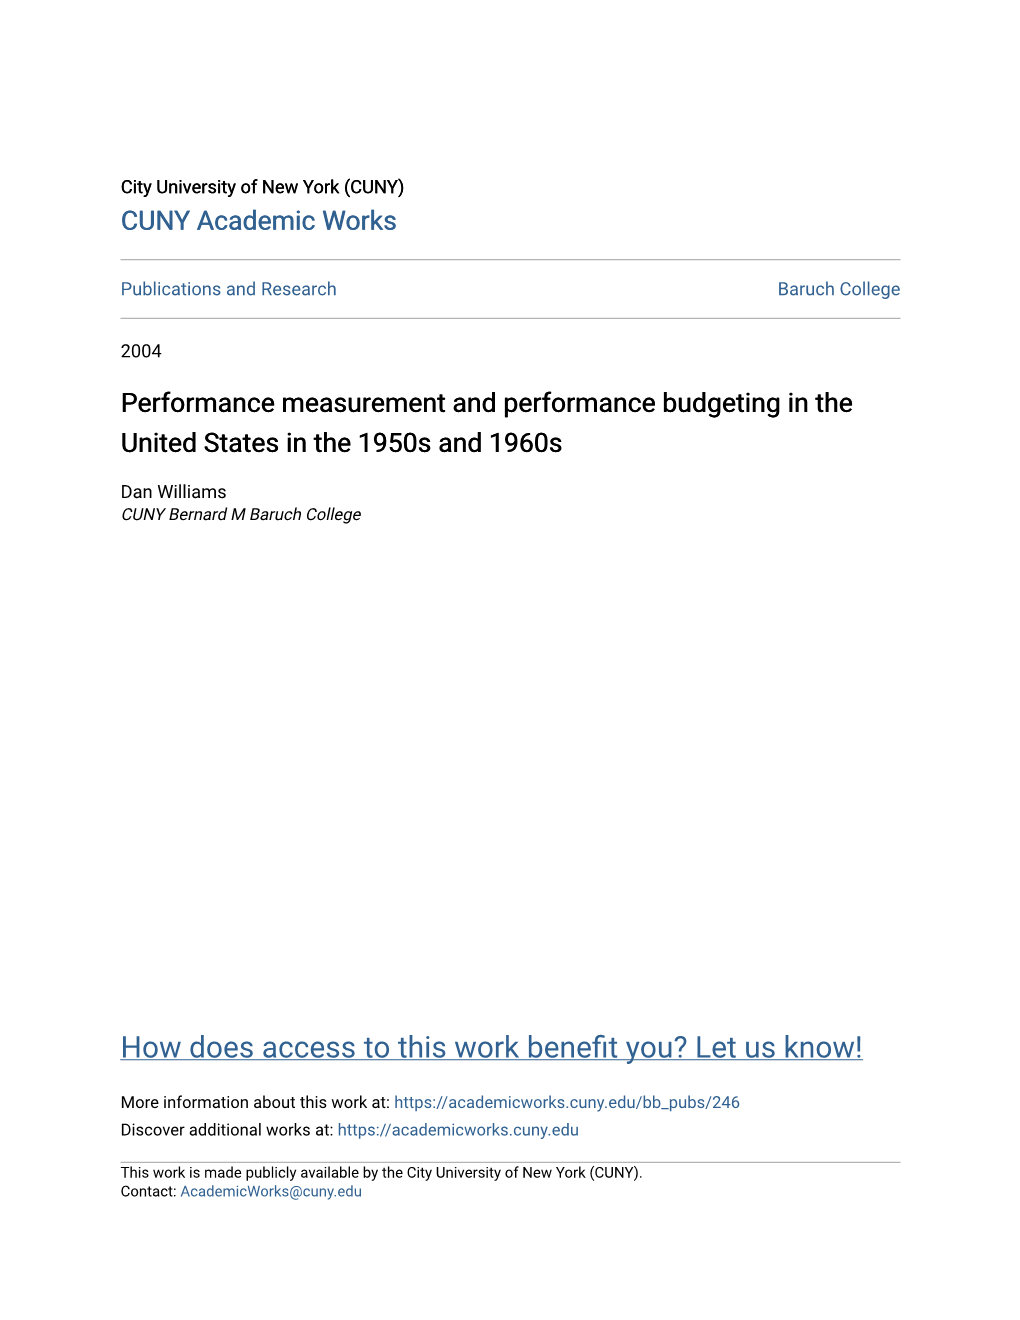 Performance Measurement and Performance Budgeting in the United States in the 1950S and 1960S